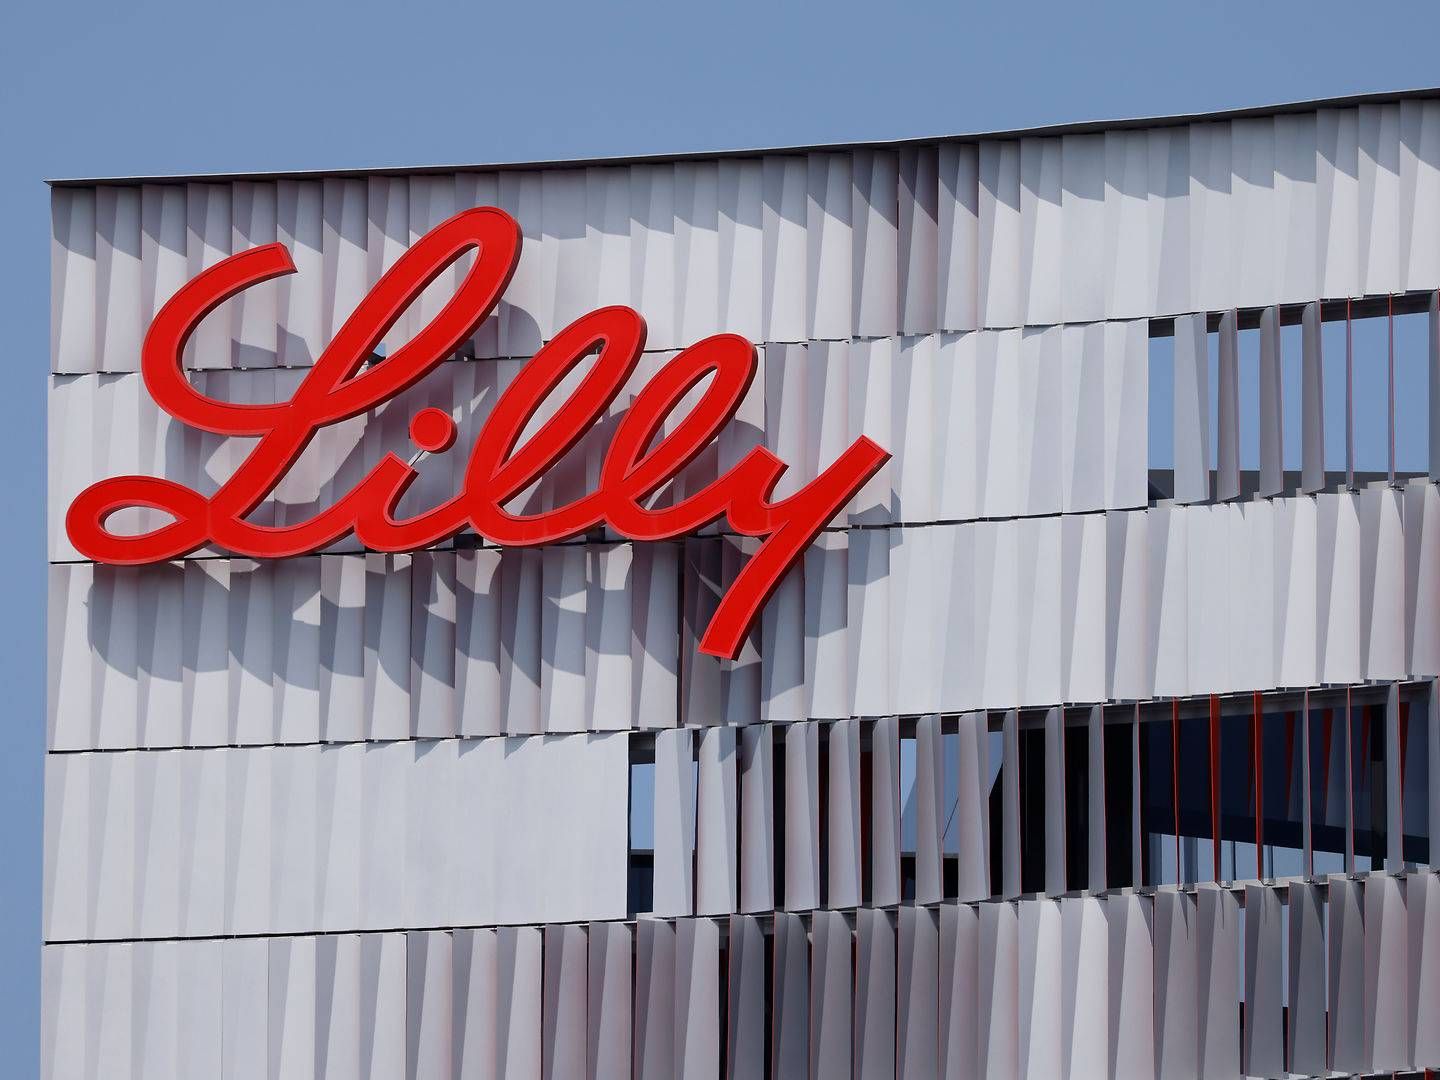 The US pharmaceutical company Eli Lilly is Novo Nordisk's greatest competitor on the diabetes market.